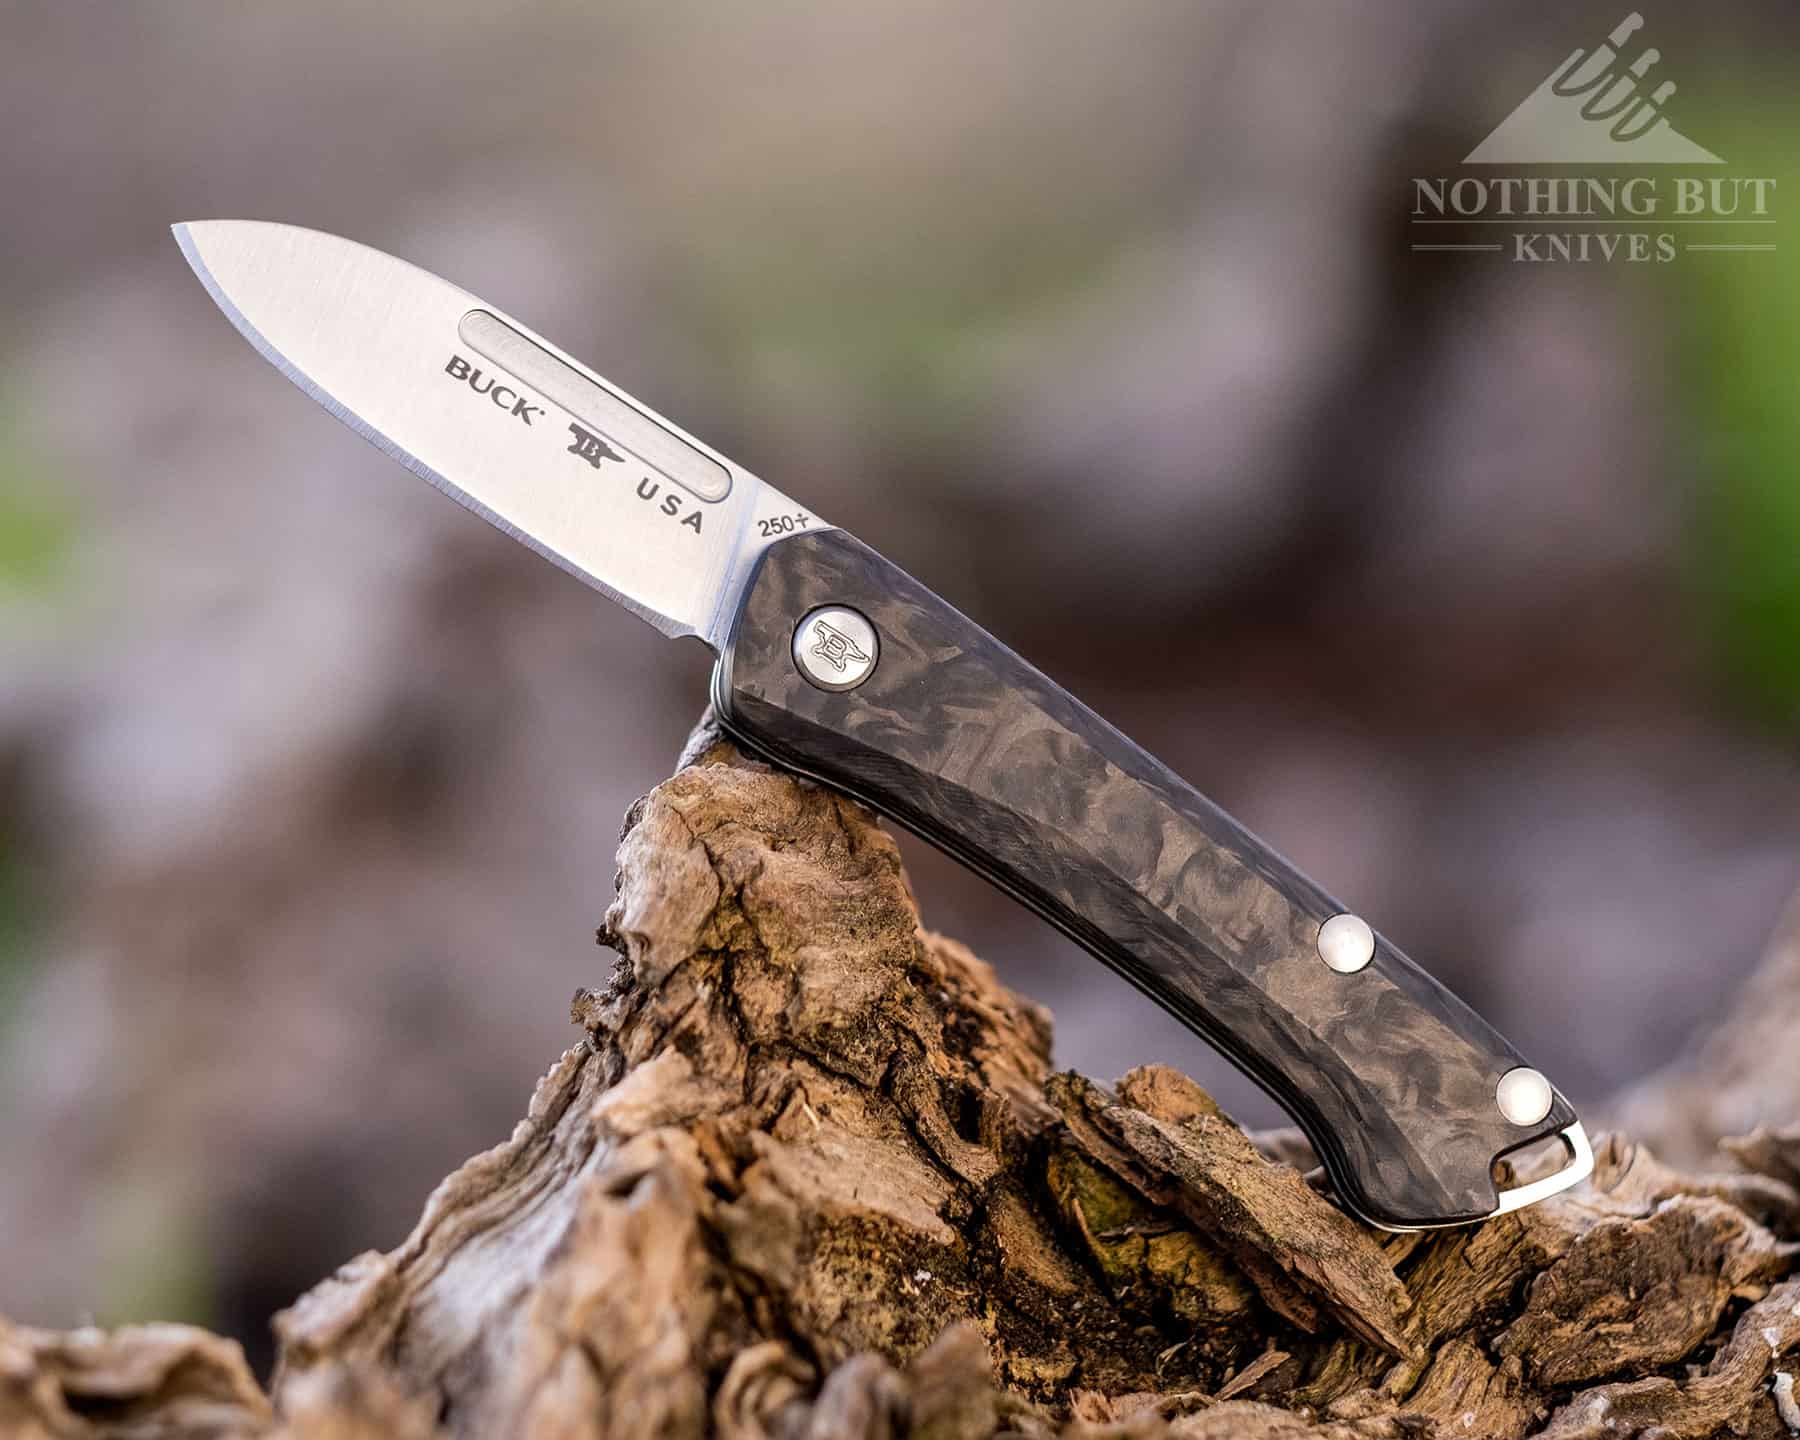 The Buck 250 Saunter slip joint knife has an S35V blade and a carbon fiber handle which sets it apart from Buck's other knife designs.